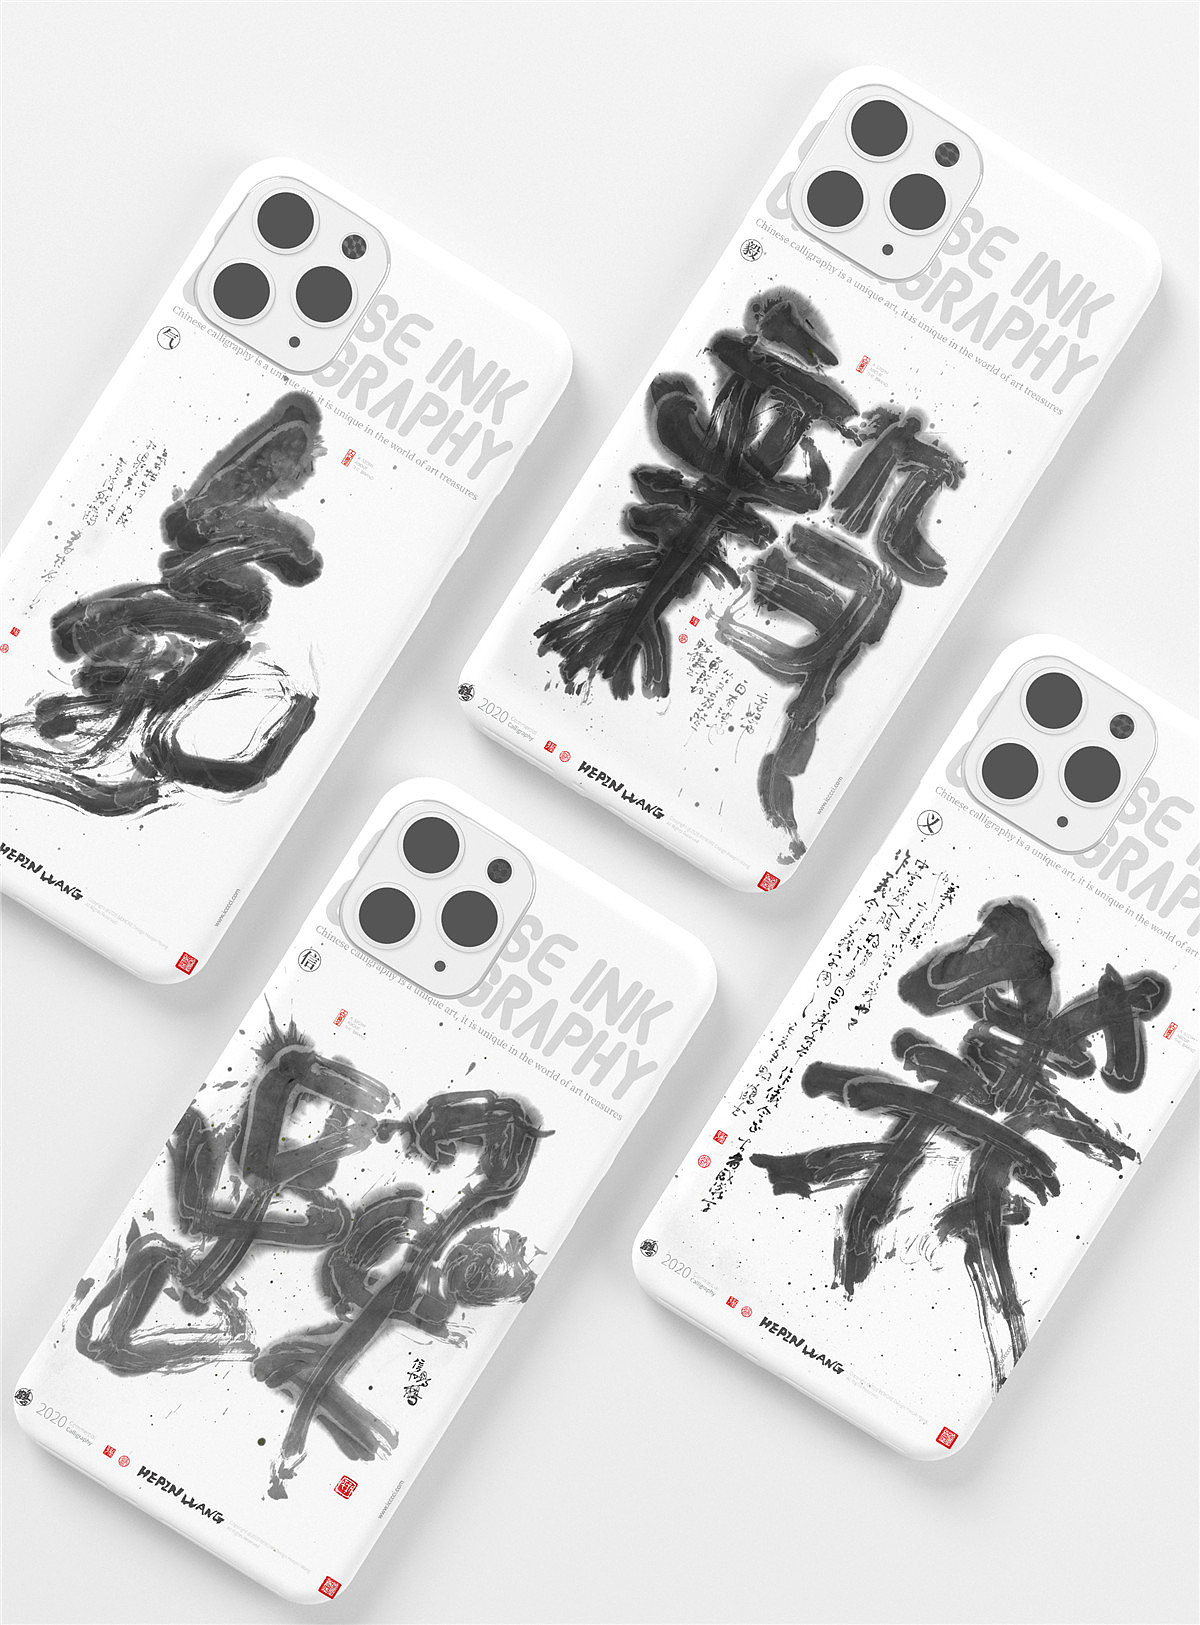 Chinese Creative Font Design-Exploration Series of Ink Painting Font Design